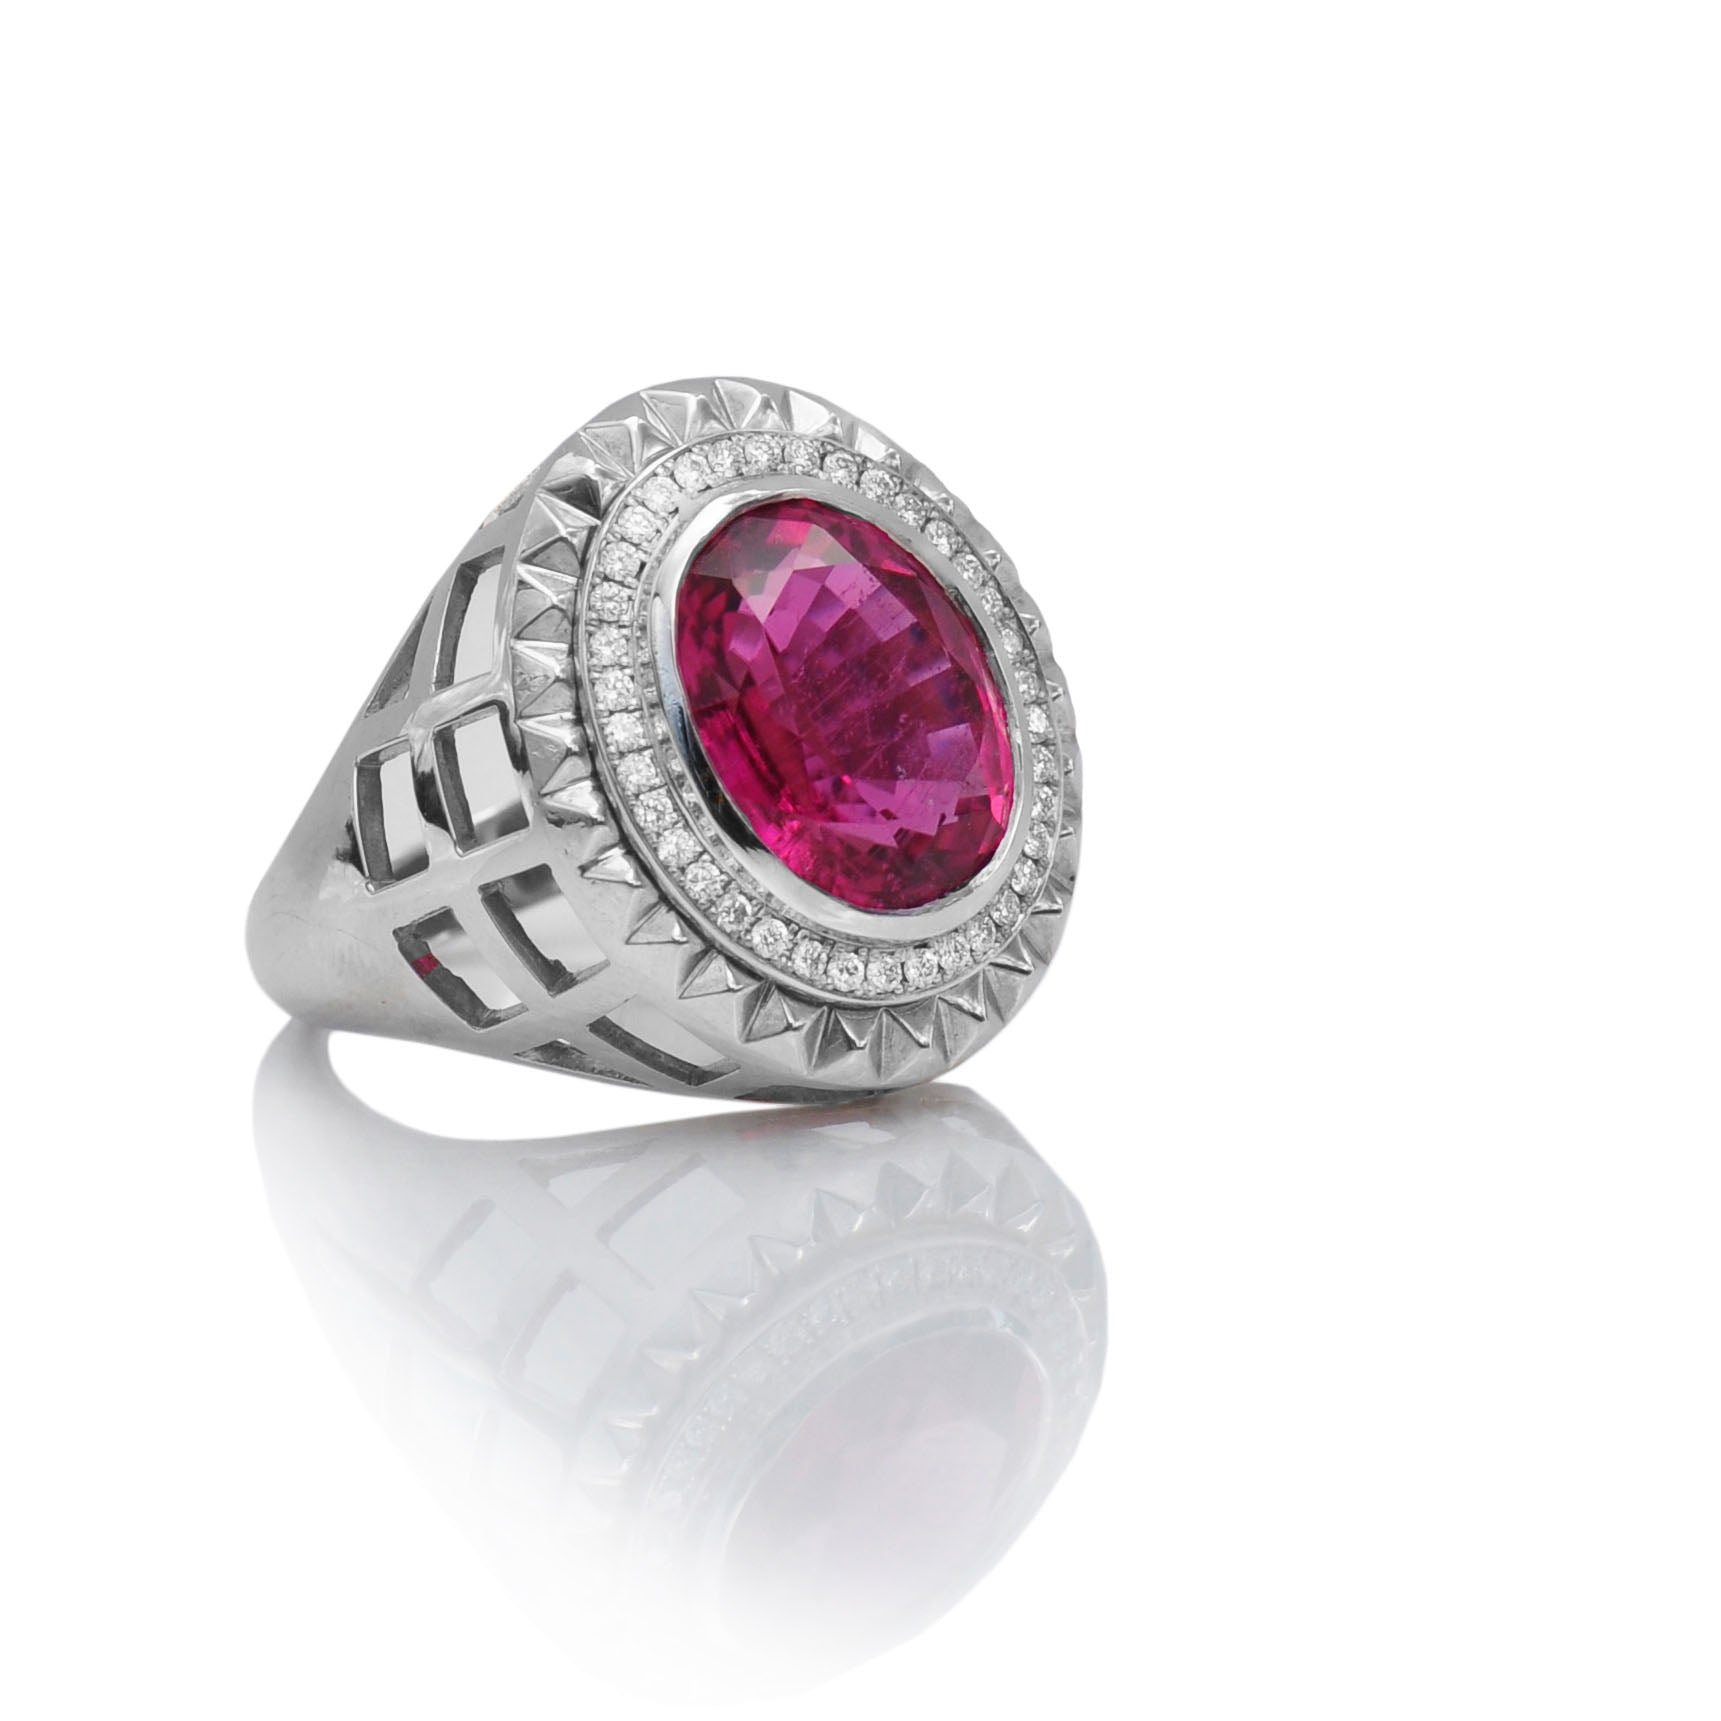 Men’s Ring - Aire-King's Signet - Red Tourmaline and Diamond Ring